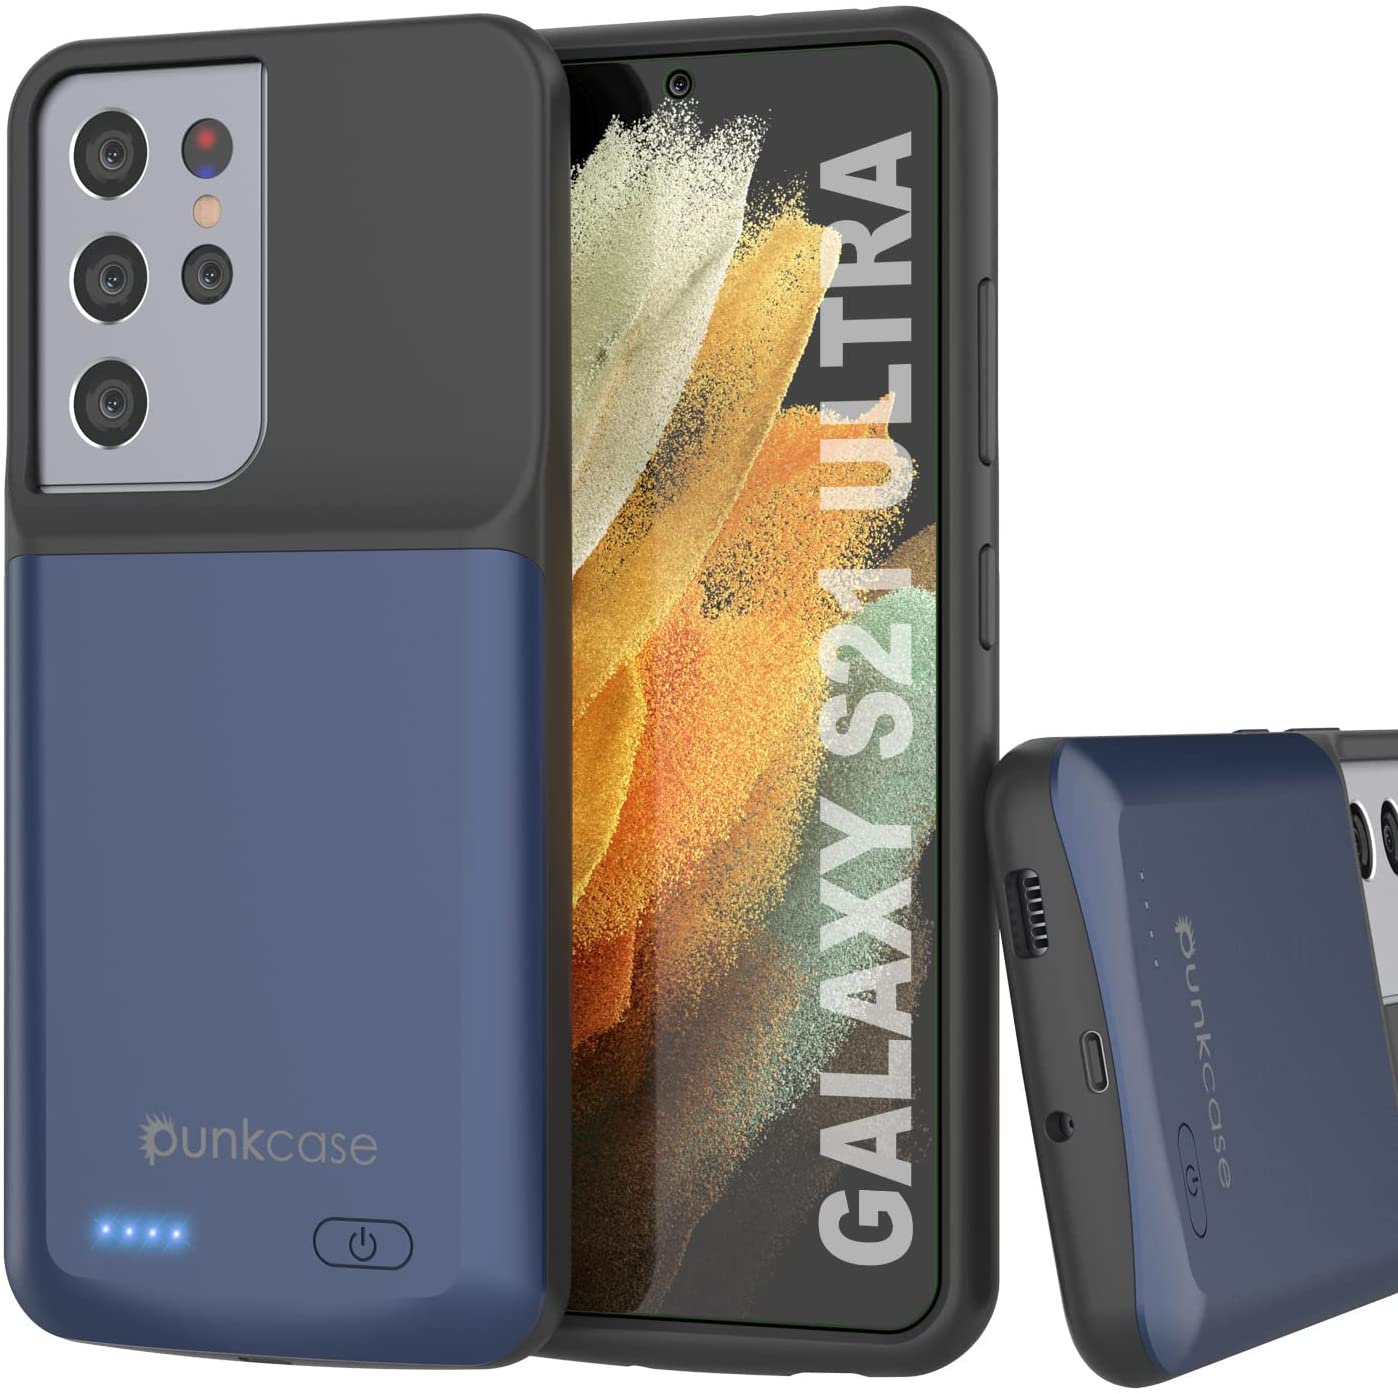 PunkJuice S21 Ultra Battery Case Blue - Portable Charging Power Juice Bank with 4700mAh